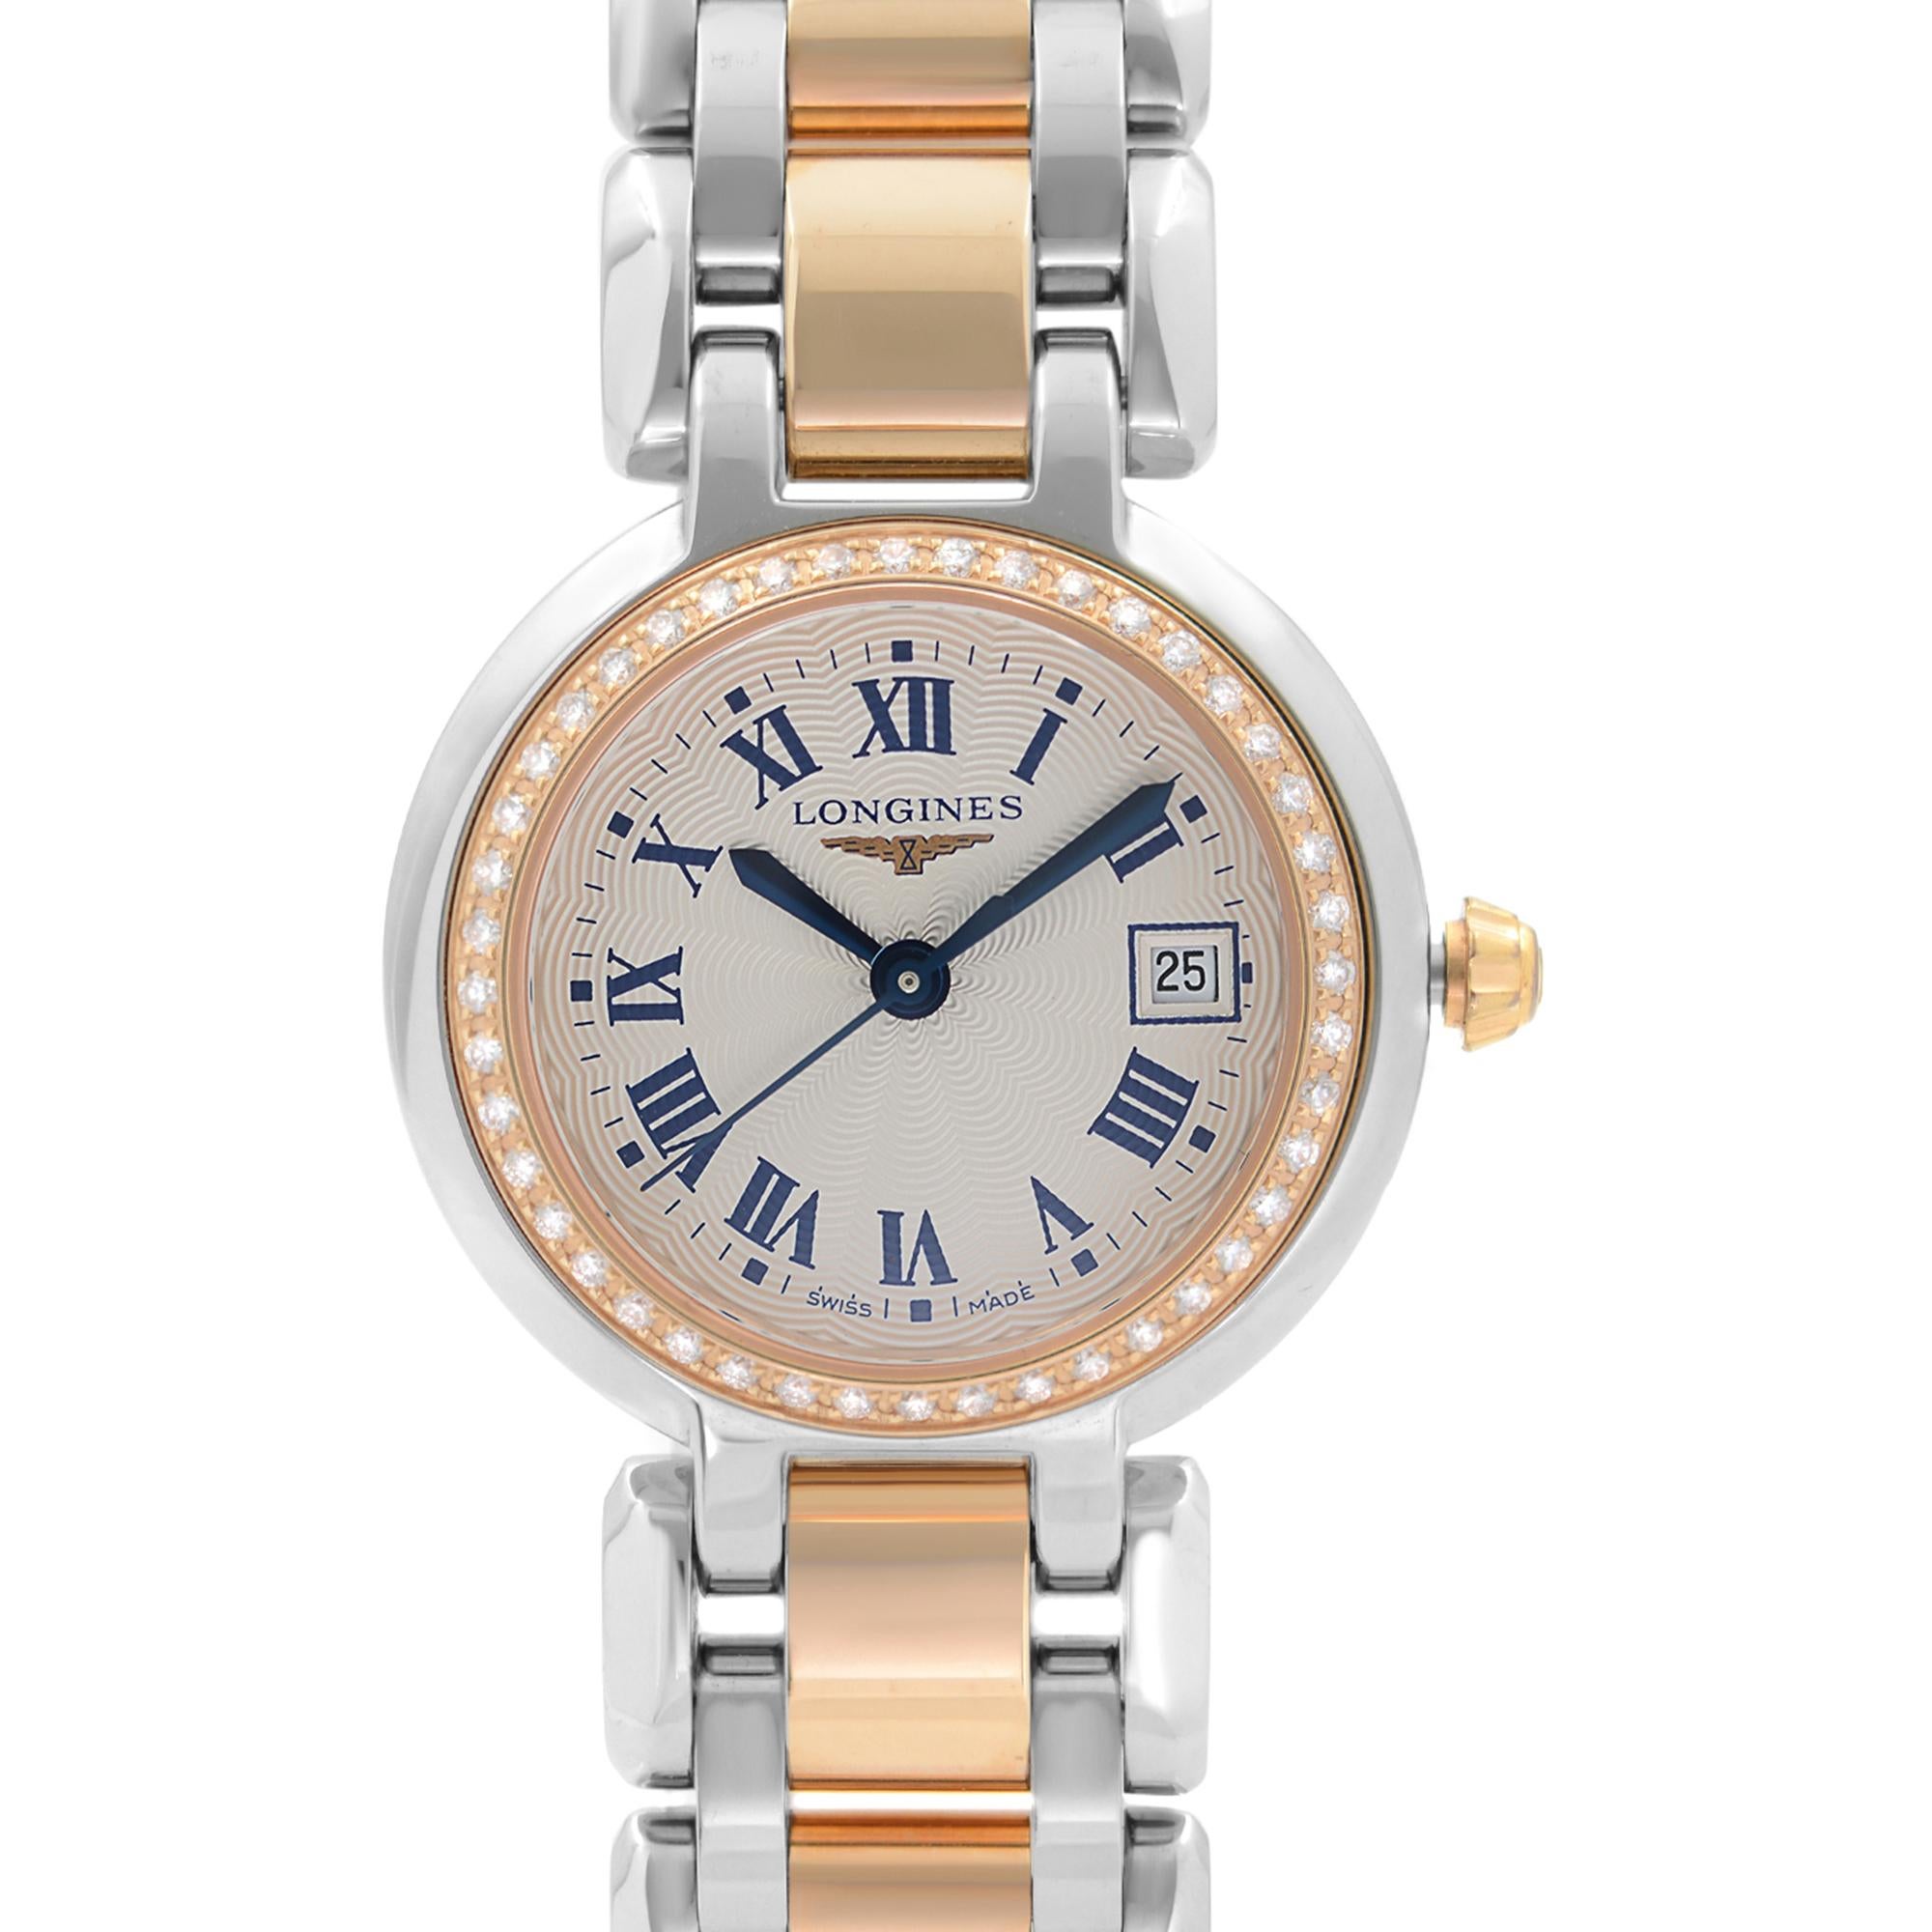 Pre-owned Like New Longines PrimaLuna 18k Rose Gold Stainless Steel Cream Roman Dial Quartz Ladies Watch L8.110.5.79.6. This Beautiful Timepiece Features: Stainless Steel Case with a Two-Tone Stainless Steel Bracelet, Fixed 18k Rose Gold Bezel Set